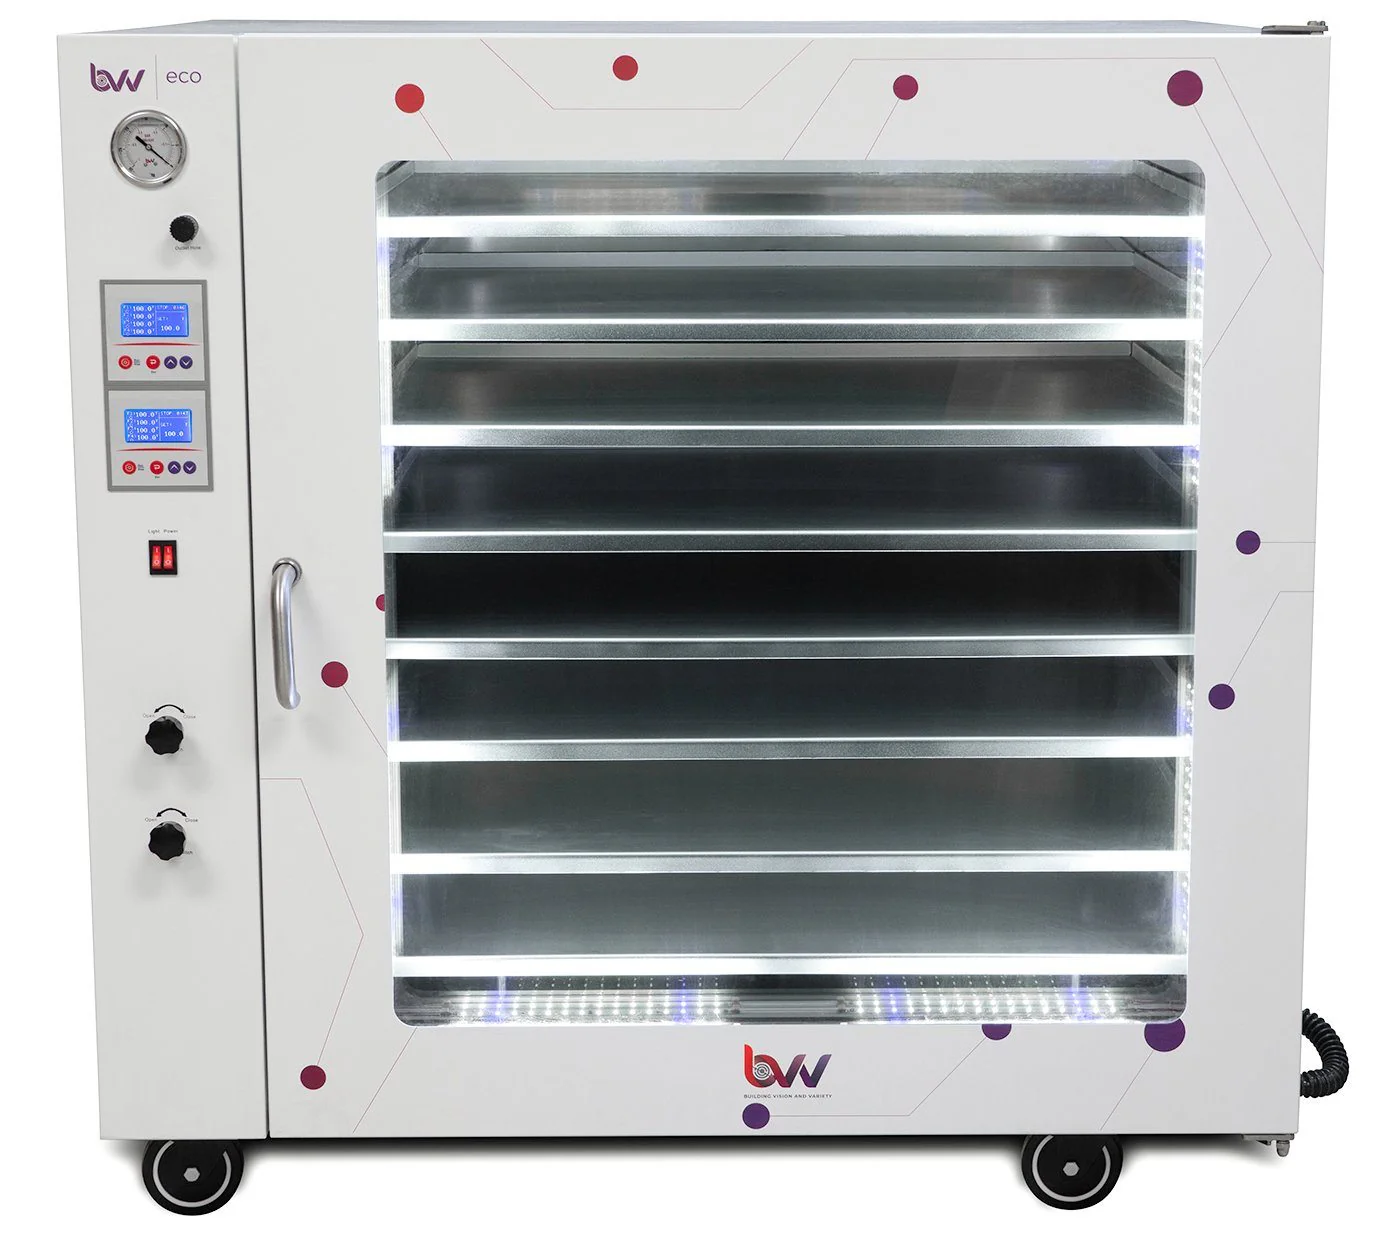 16CF ECO Vacuum Oven - 8 Individually Heated Shelves, LED display, LED's Questions & Answers